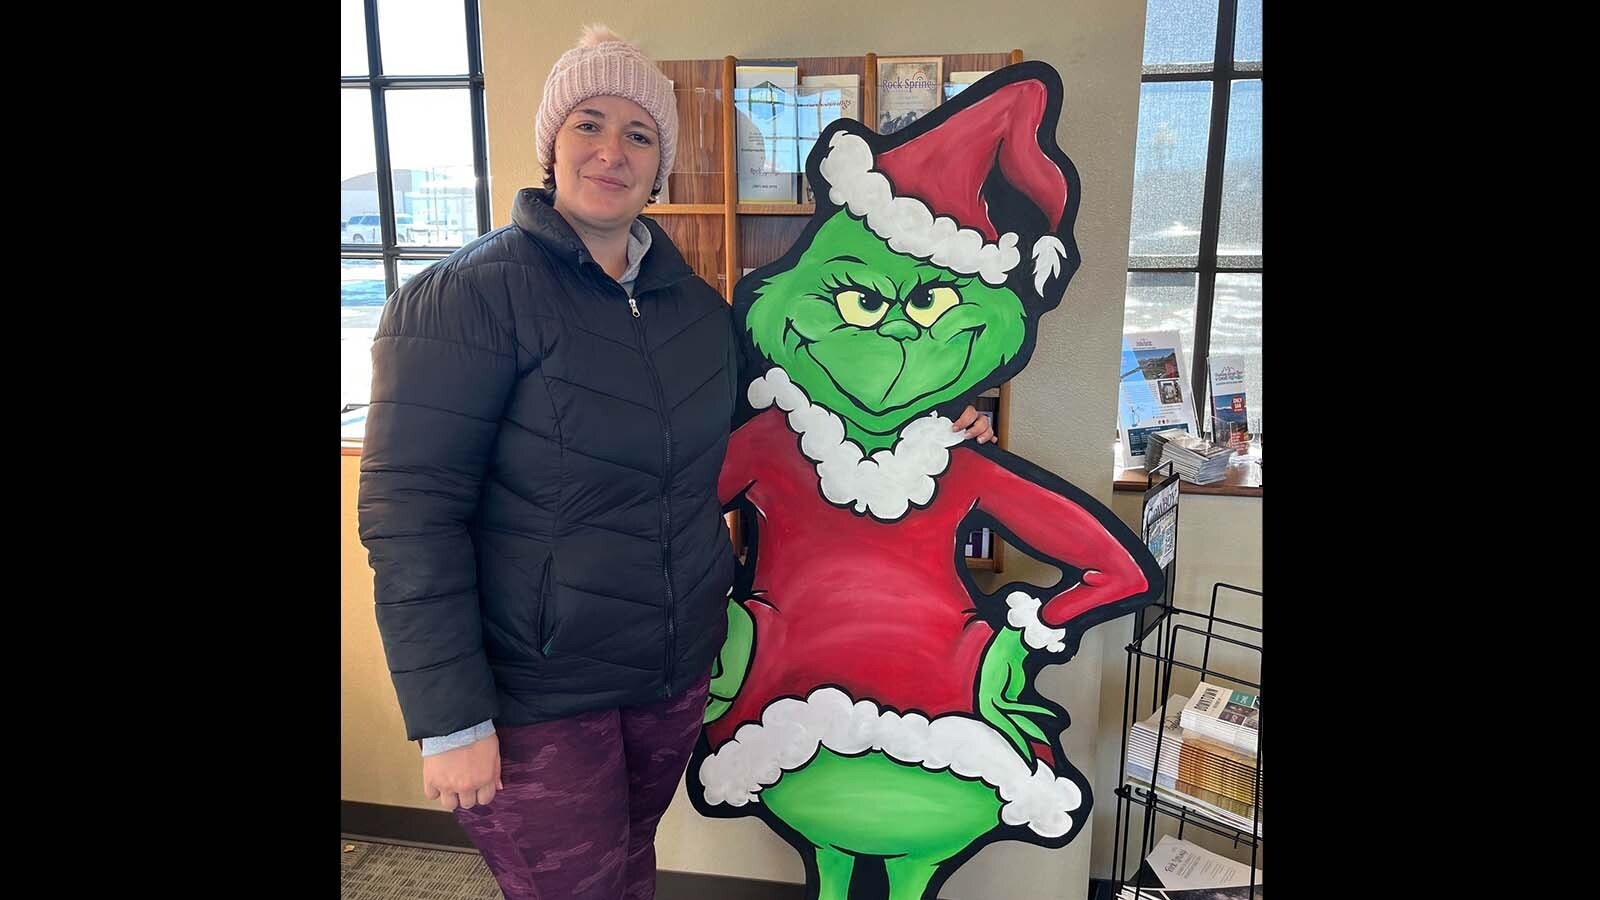 Artist Stephanie Lewis created this life-size Grinch for the Rock Springs community holiday display, but for the second year in a row, someone has stolen the Grinch.